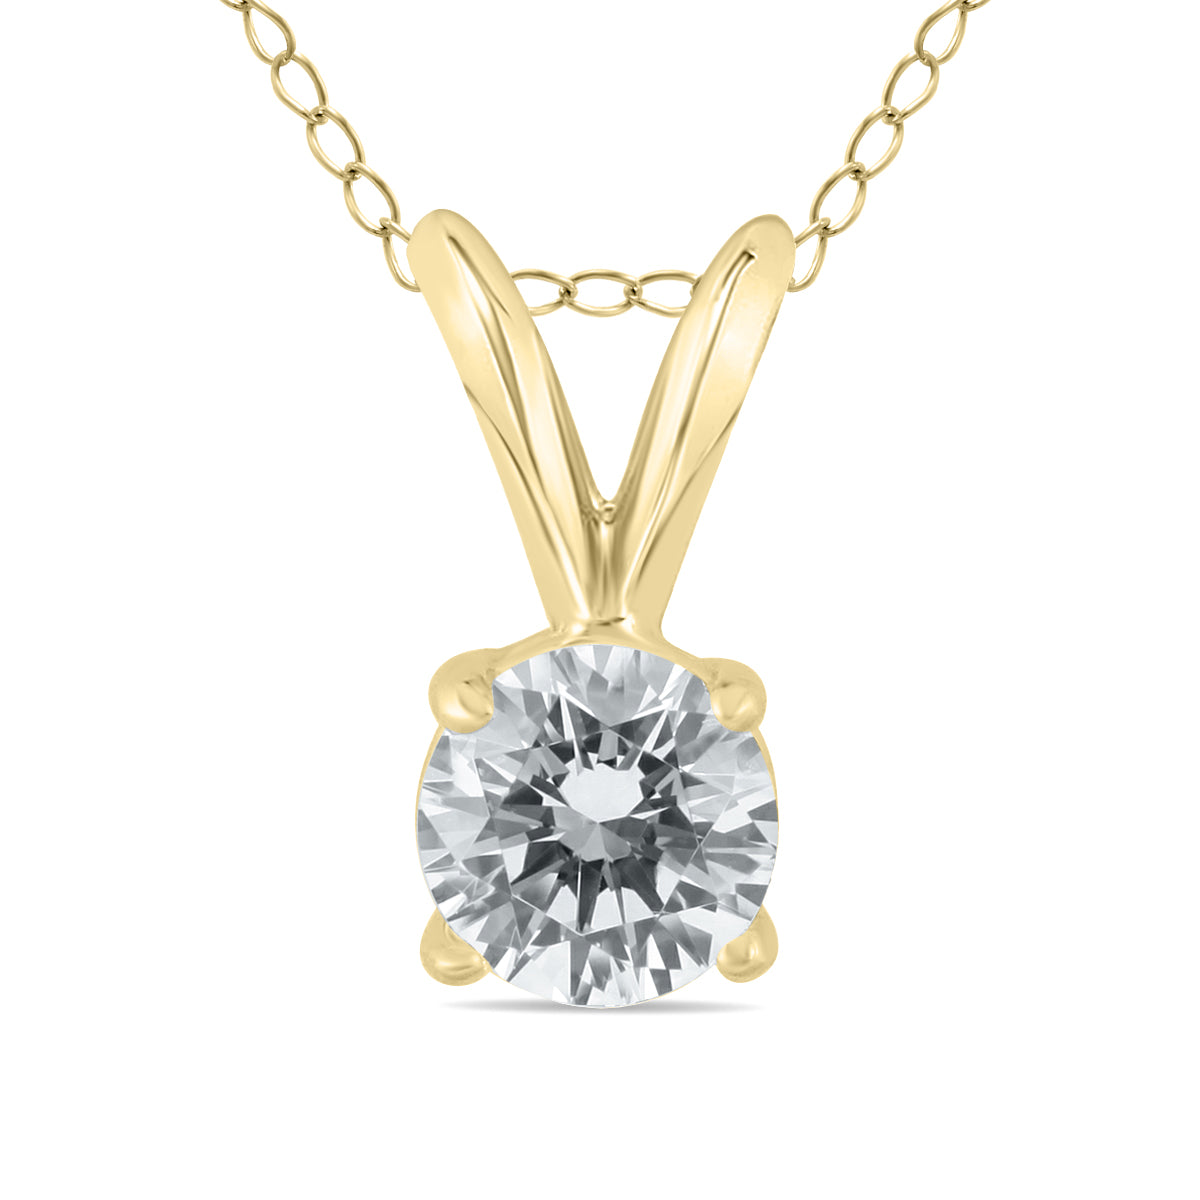 Sselects Ags Certified 14k 1/3 Carat Diamond Solitaire Pendant In Gold